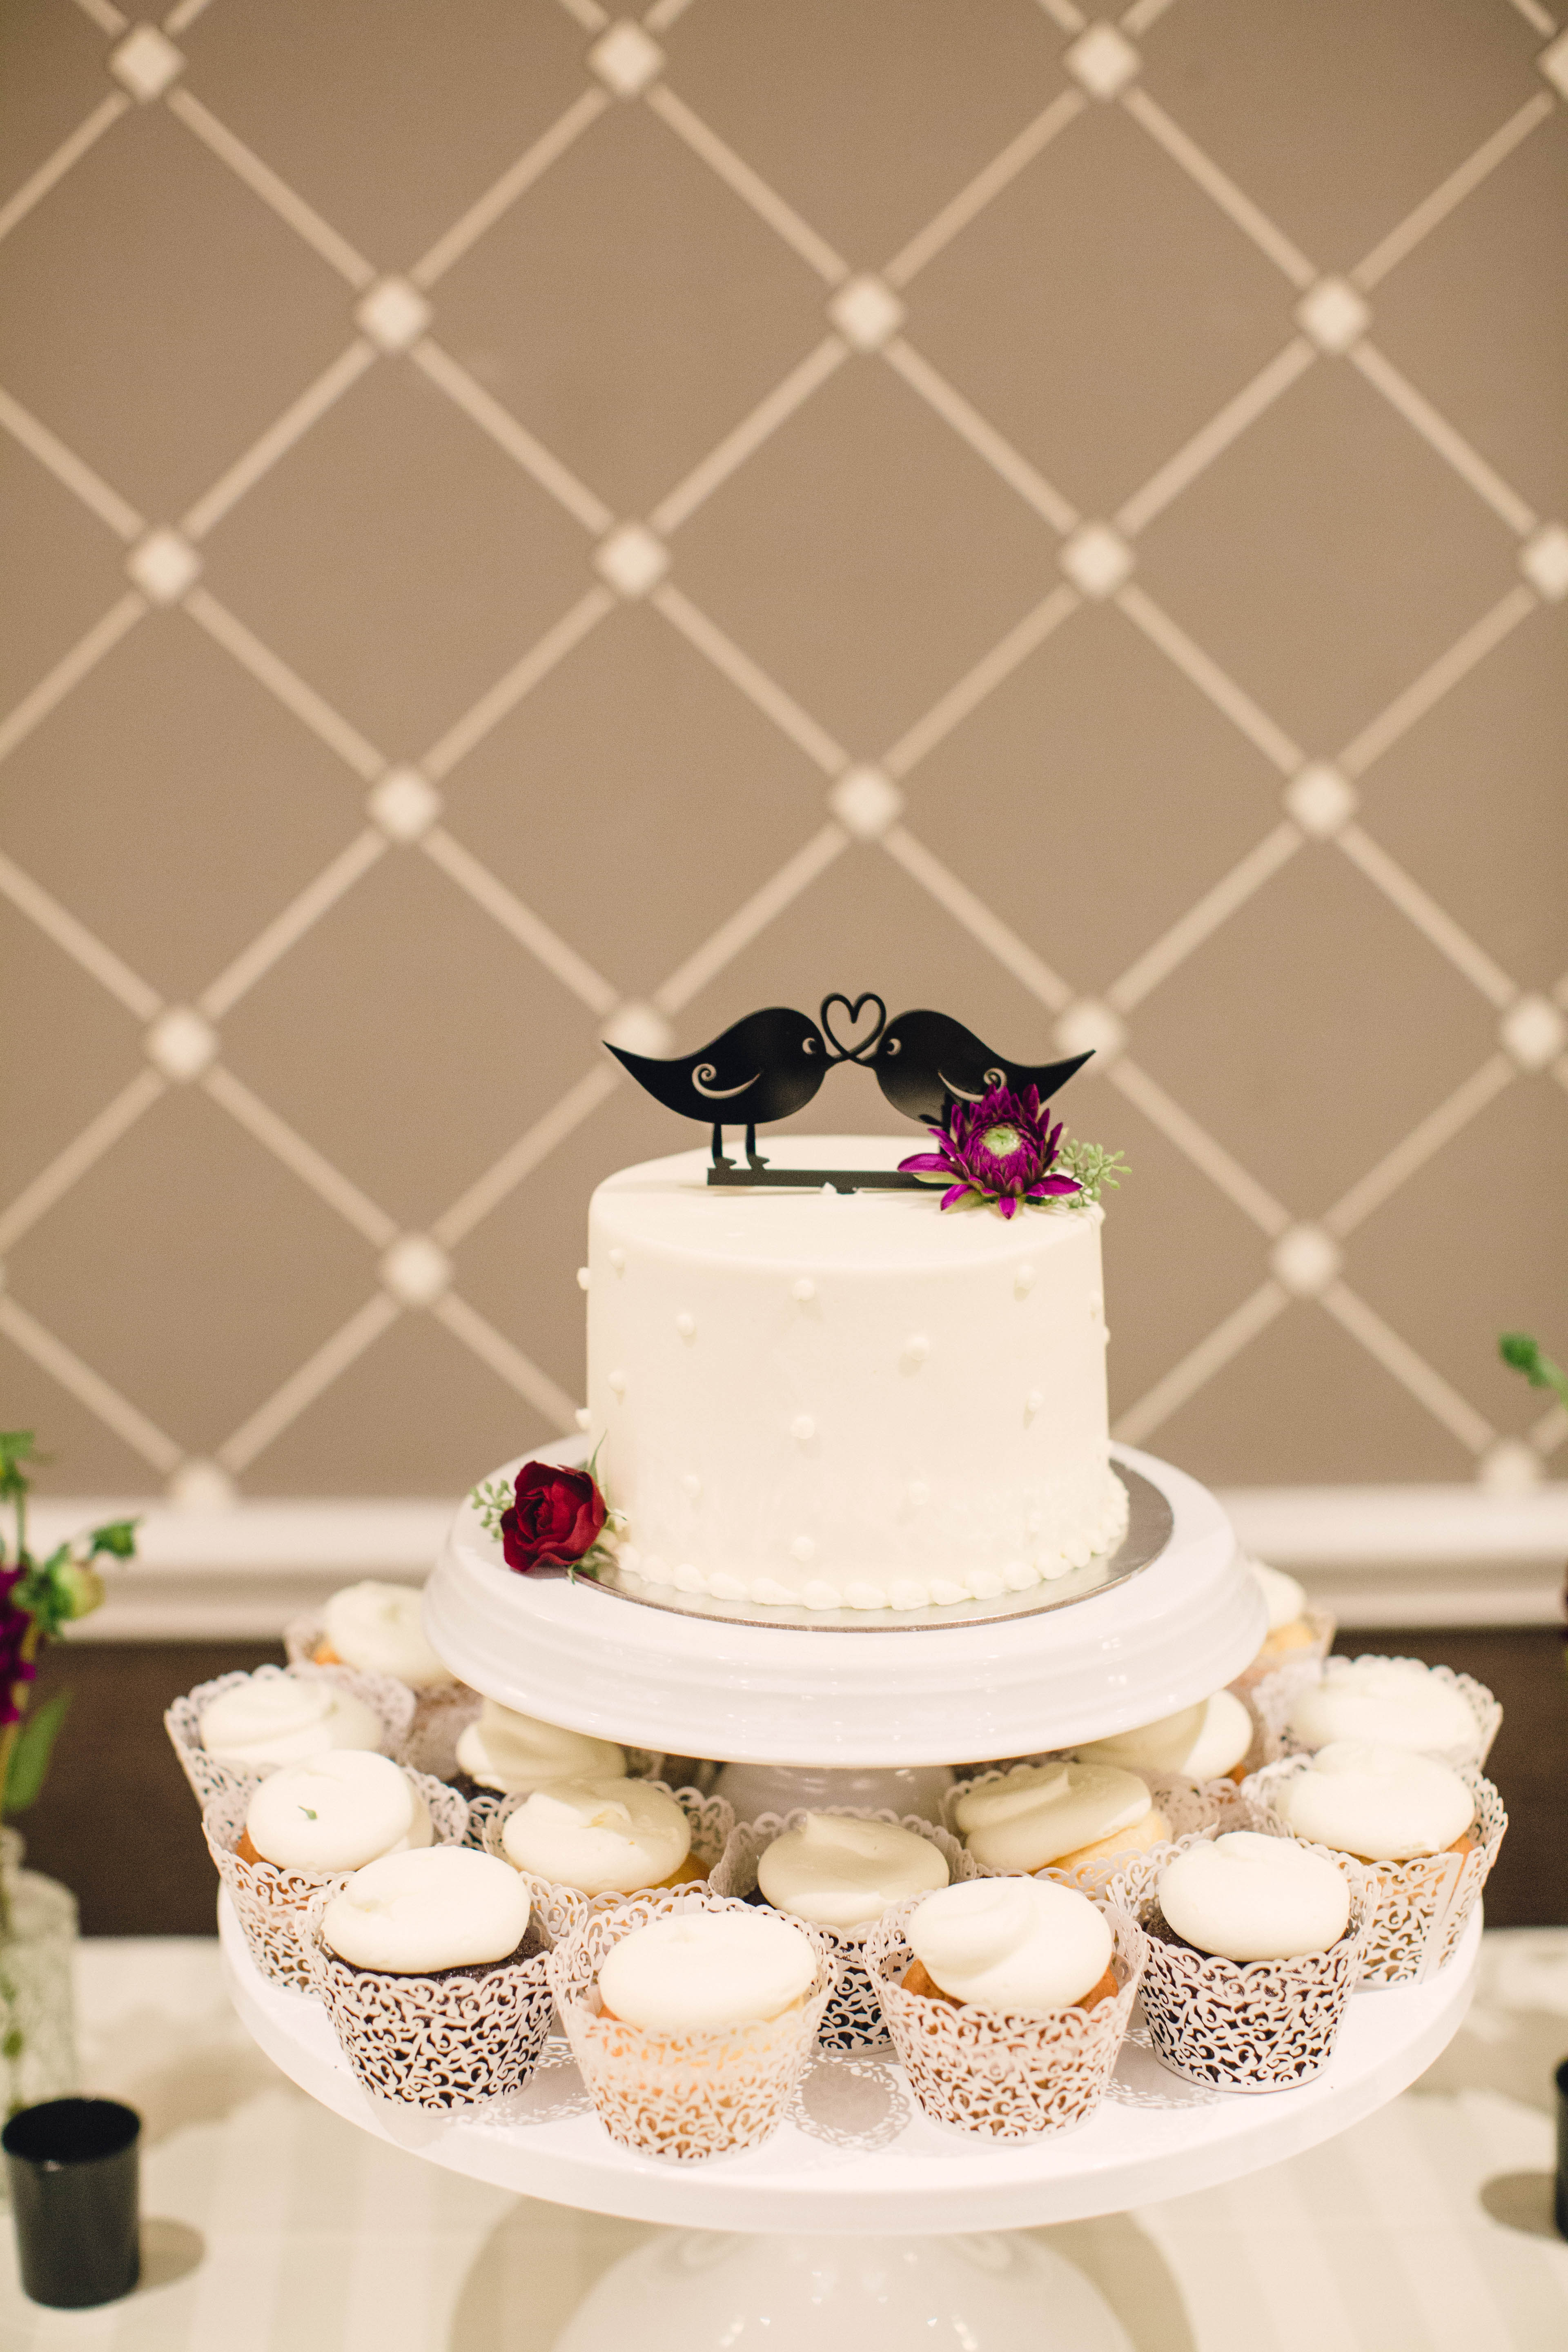 The Alexandrian Hotel, Wedding Planning by Bright Occasions, Kristen Gardner Photography